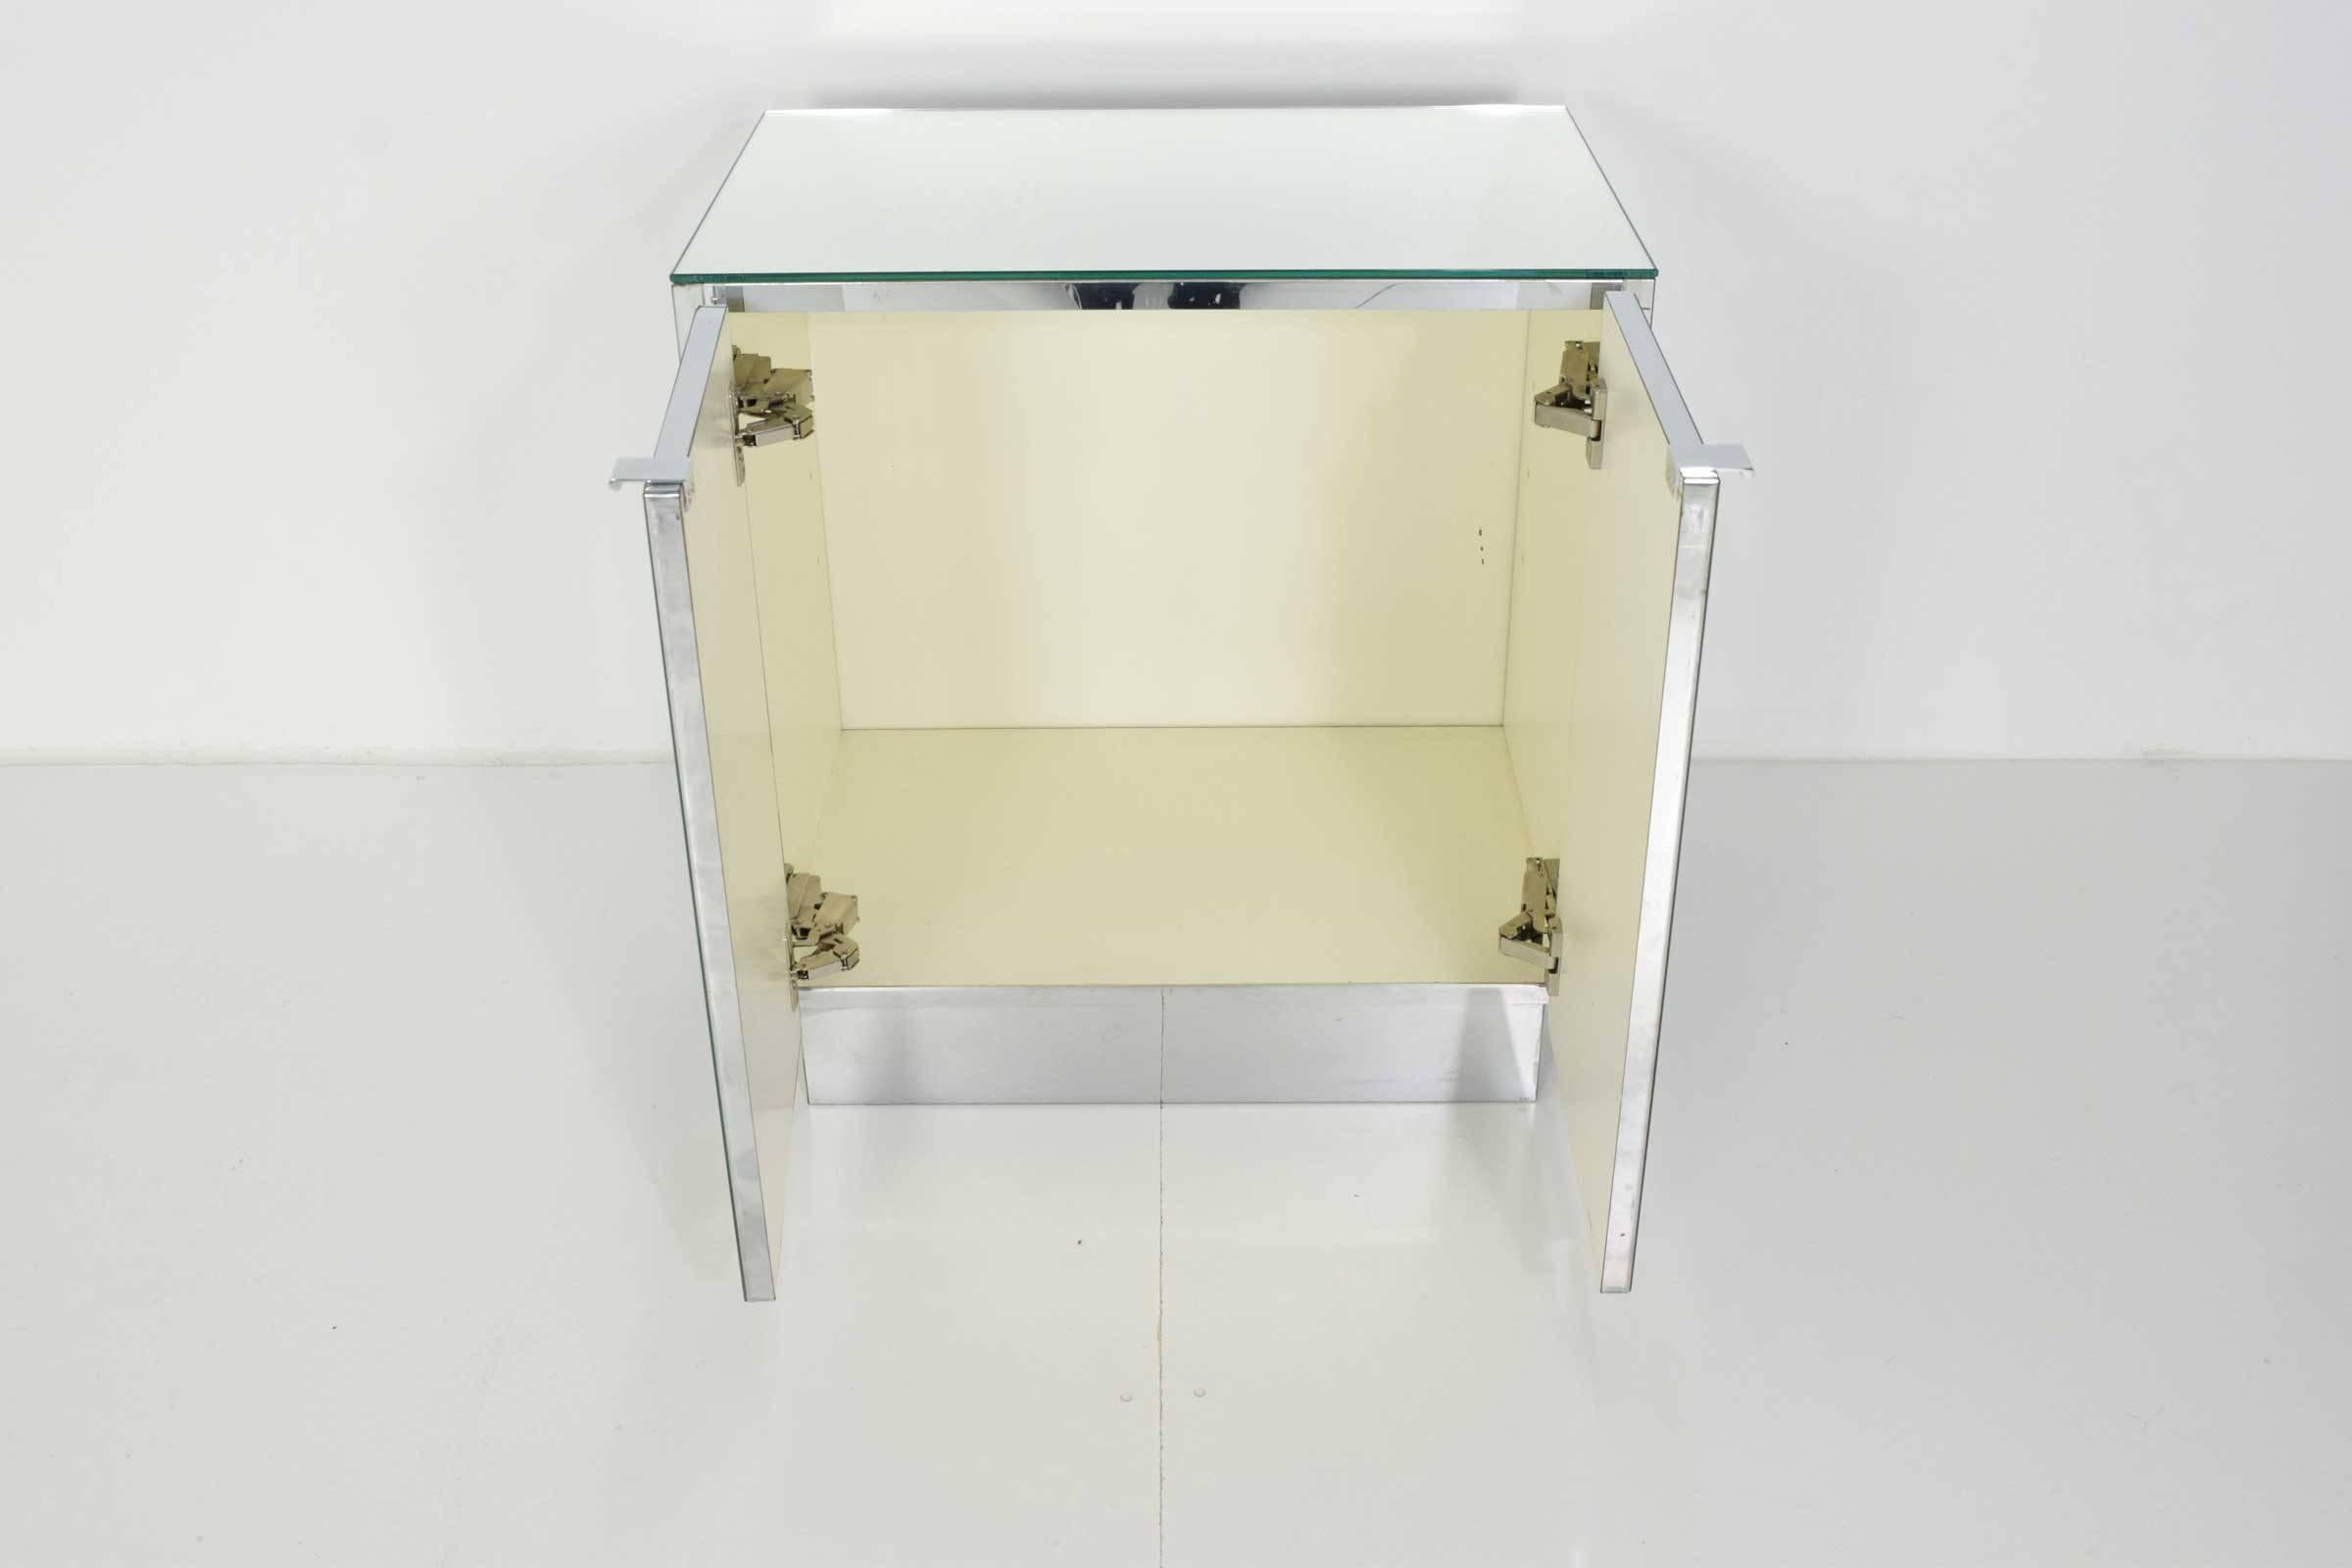 Very nice two-door mirrored chest/side table/nightstand by Ello Furniture Company. Top and front are mirrored, sides and base are chrome. We have a three door chests that compliments this very nicely and both can be used as nightstands.